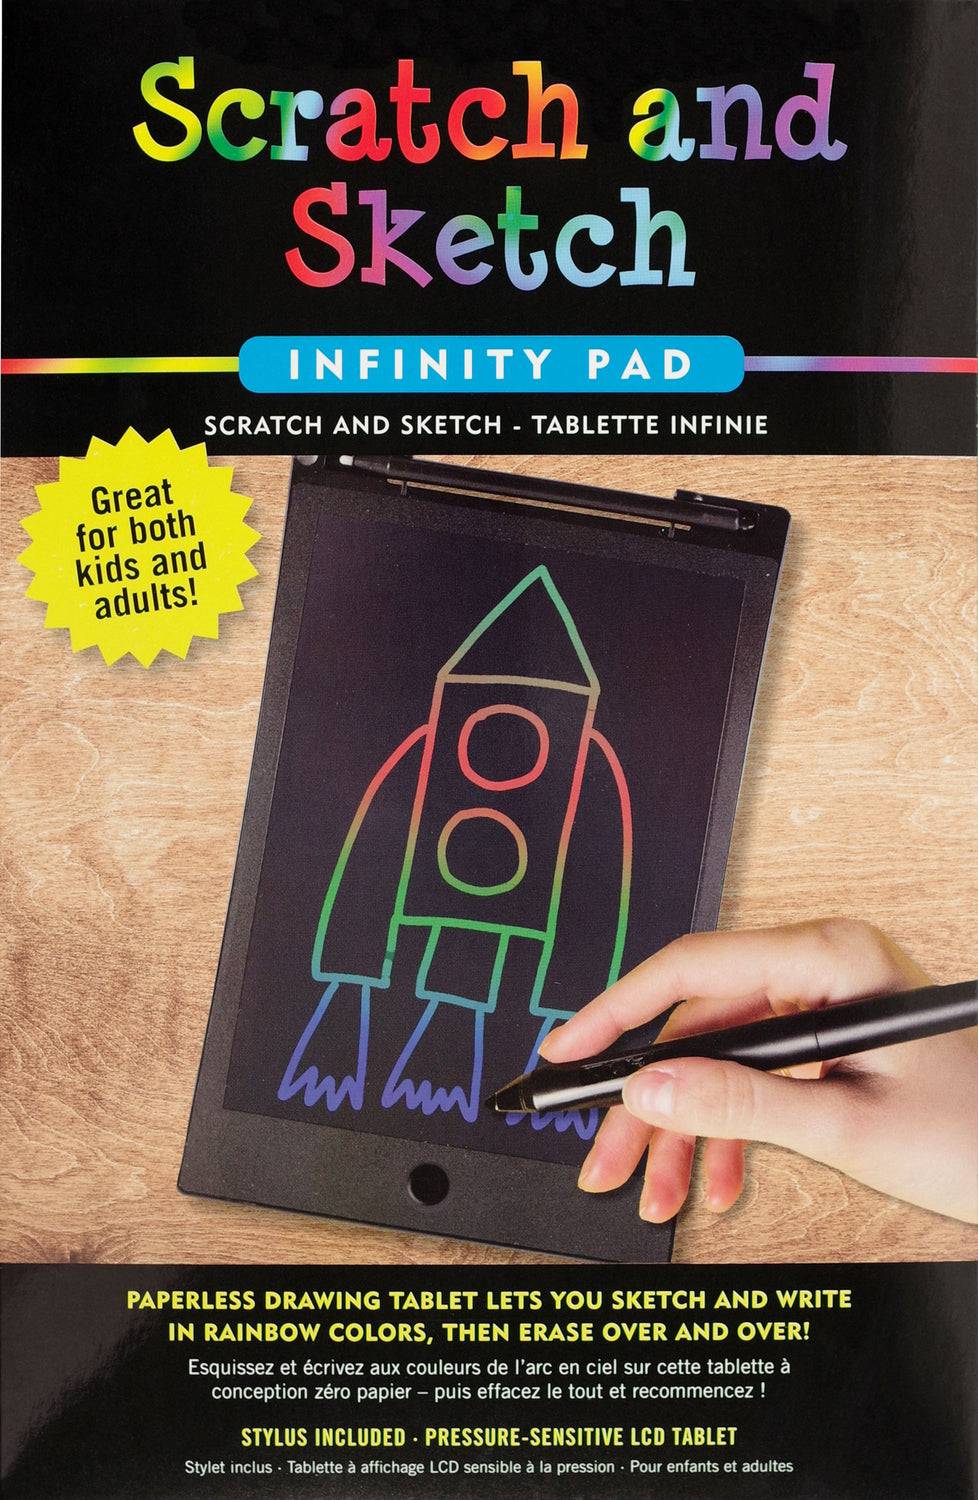 Scratch Sketch Infinity Pad - A Child's Delight